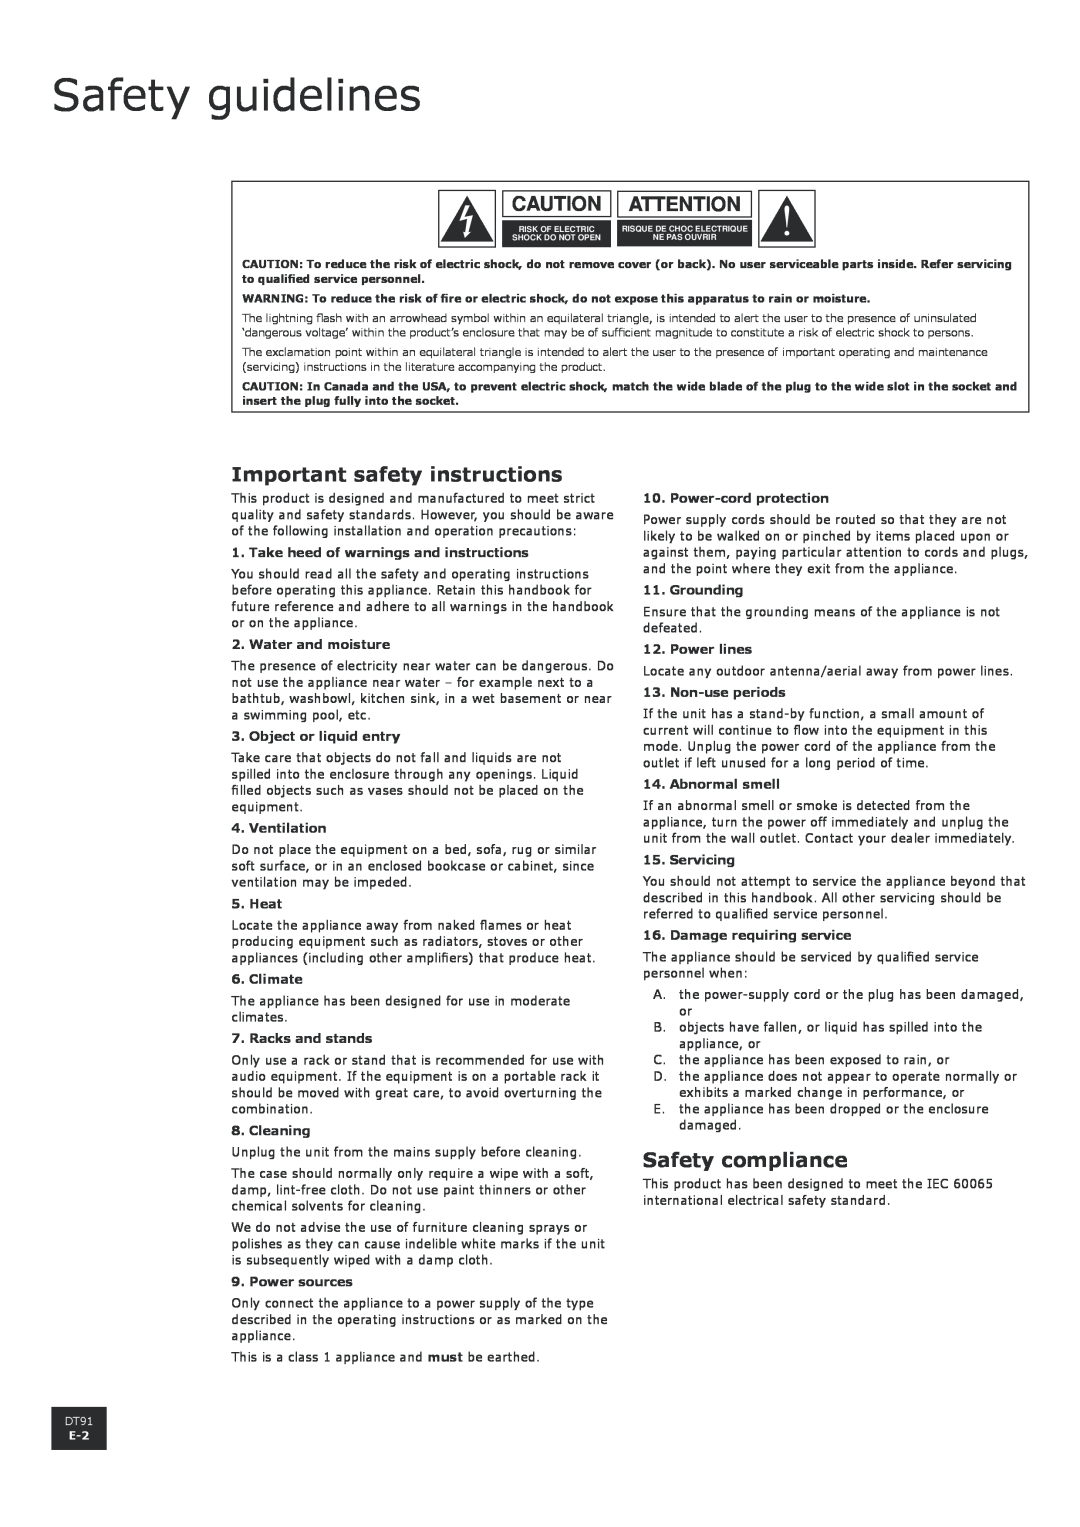 Arcam DT91 Safety guidelines, Caution Attention, Important safety instructions, Safety compliance, Water and moisture 